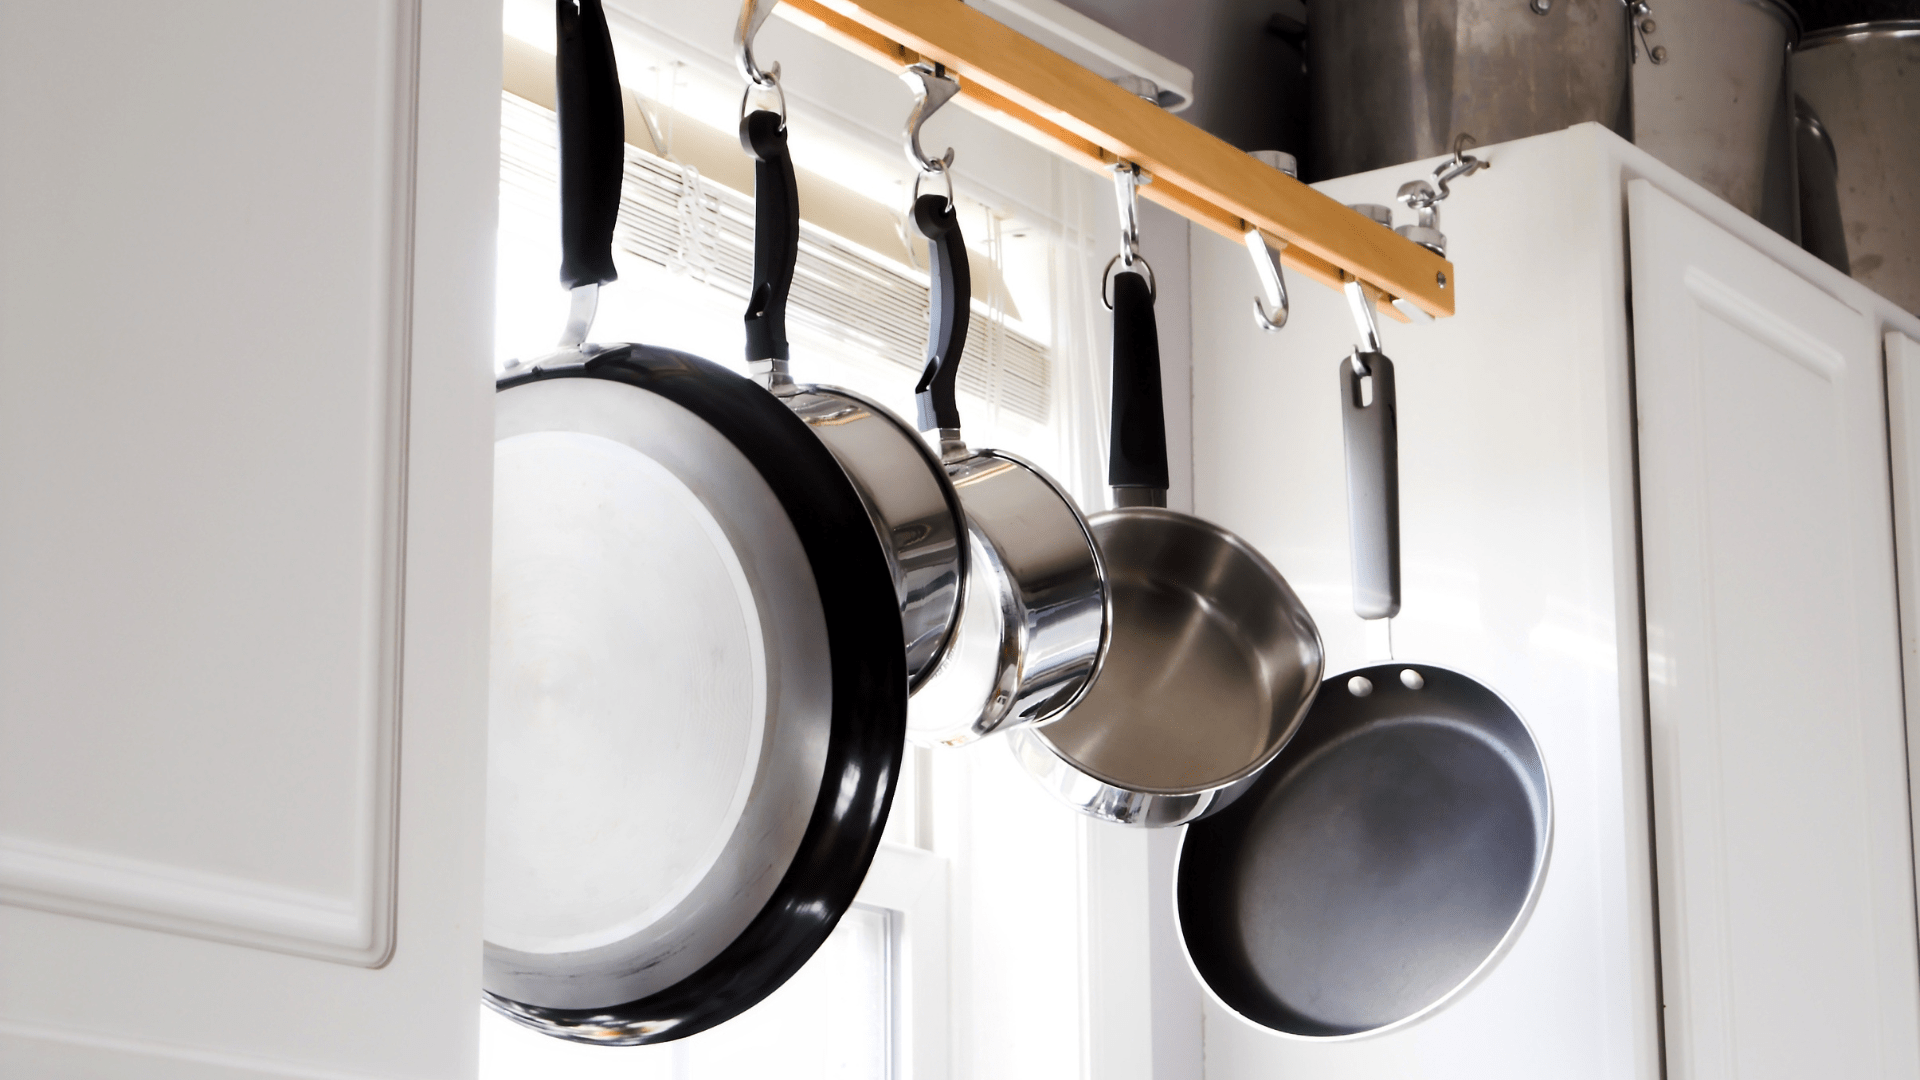 7 Ideas for Storing Your Pots and Pans